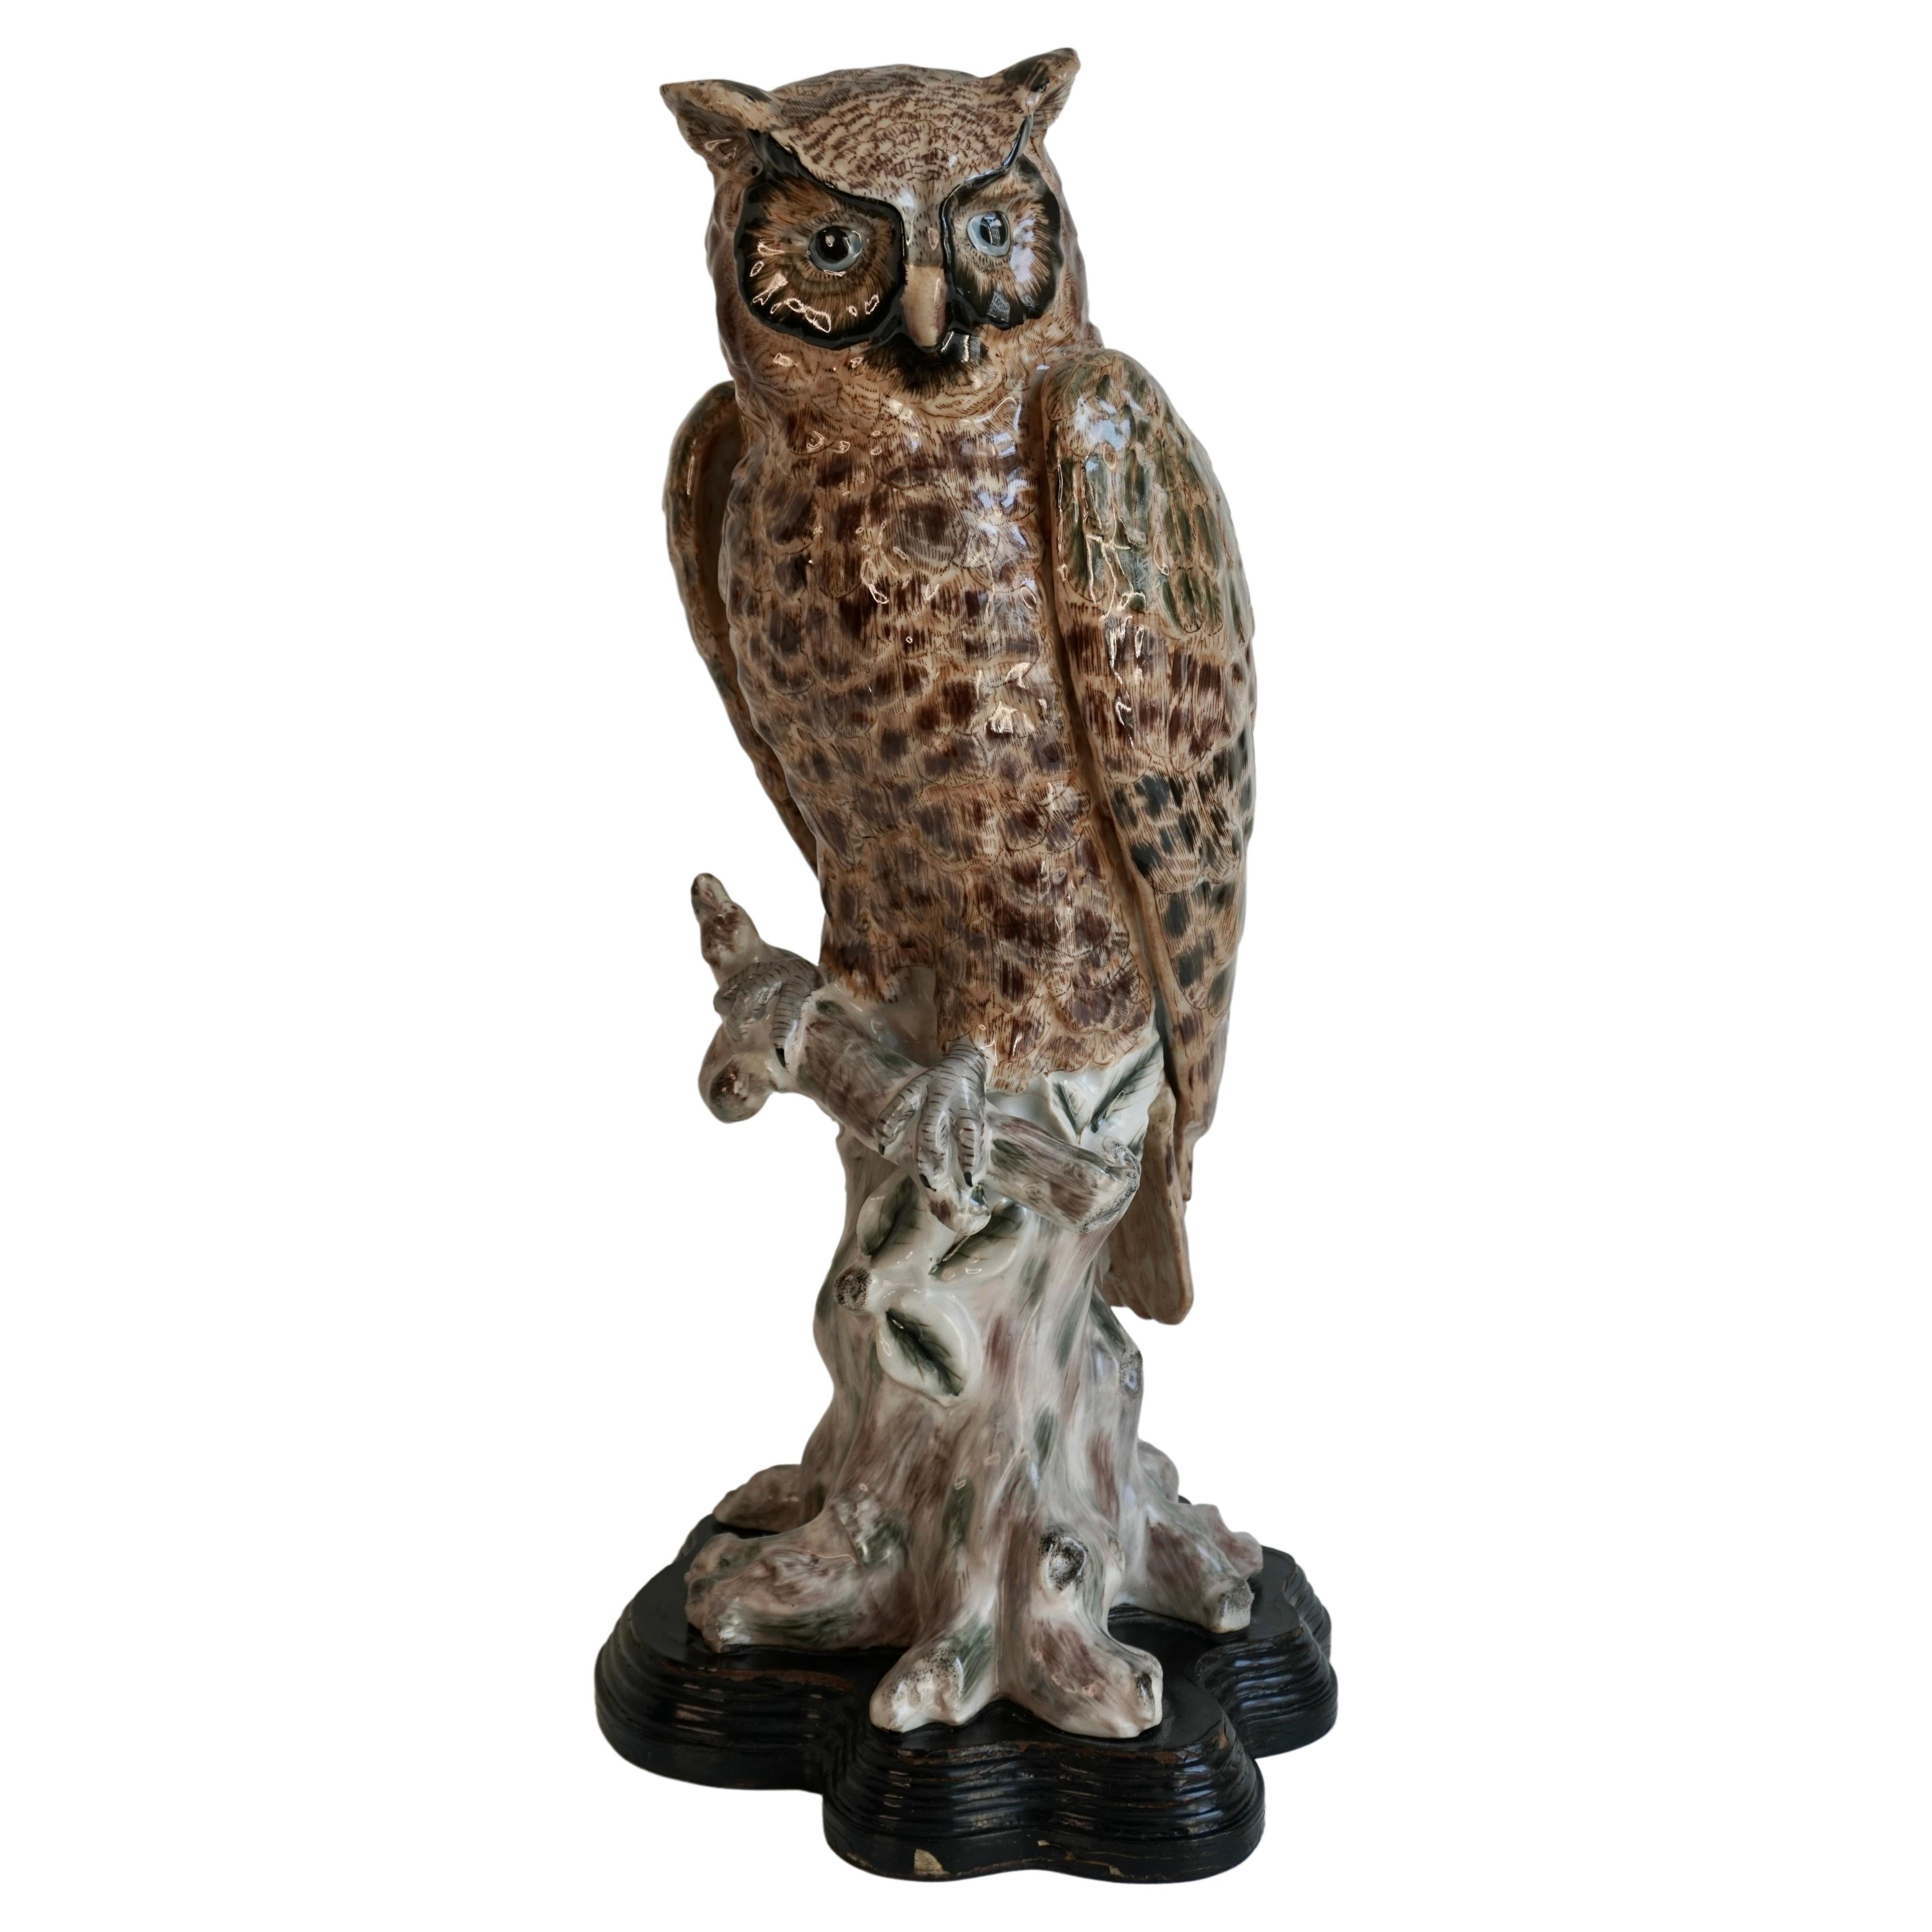 20th Century Rare and Mint Condition Brown Glazed Ceramic Barn Owl Sculpture For Sale